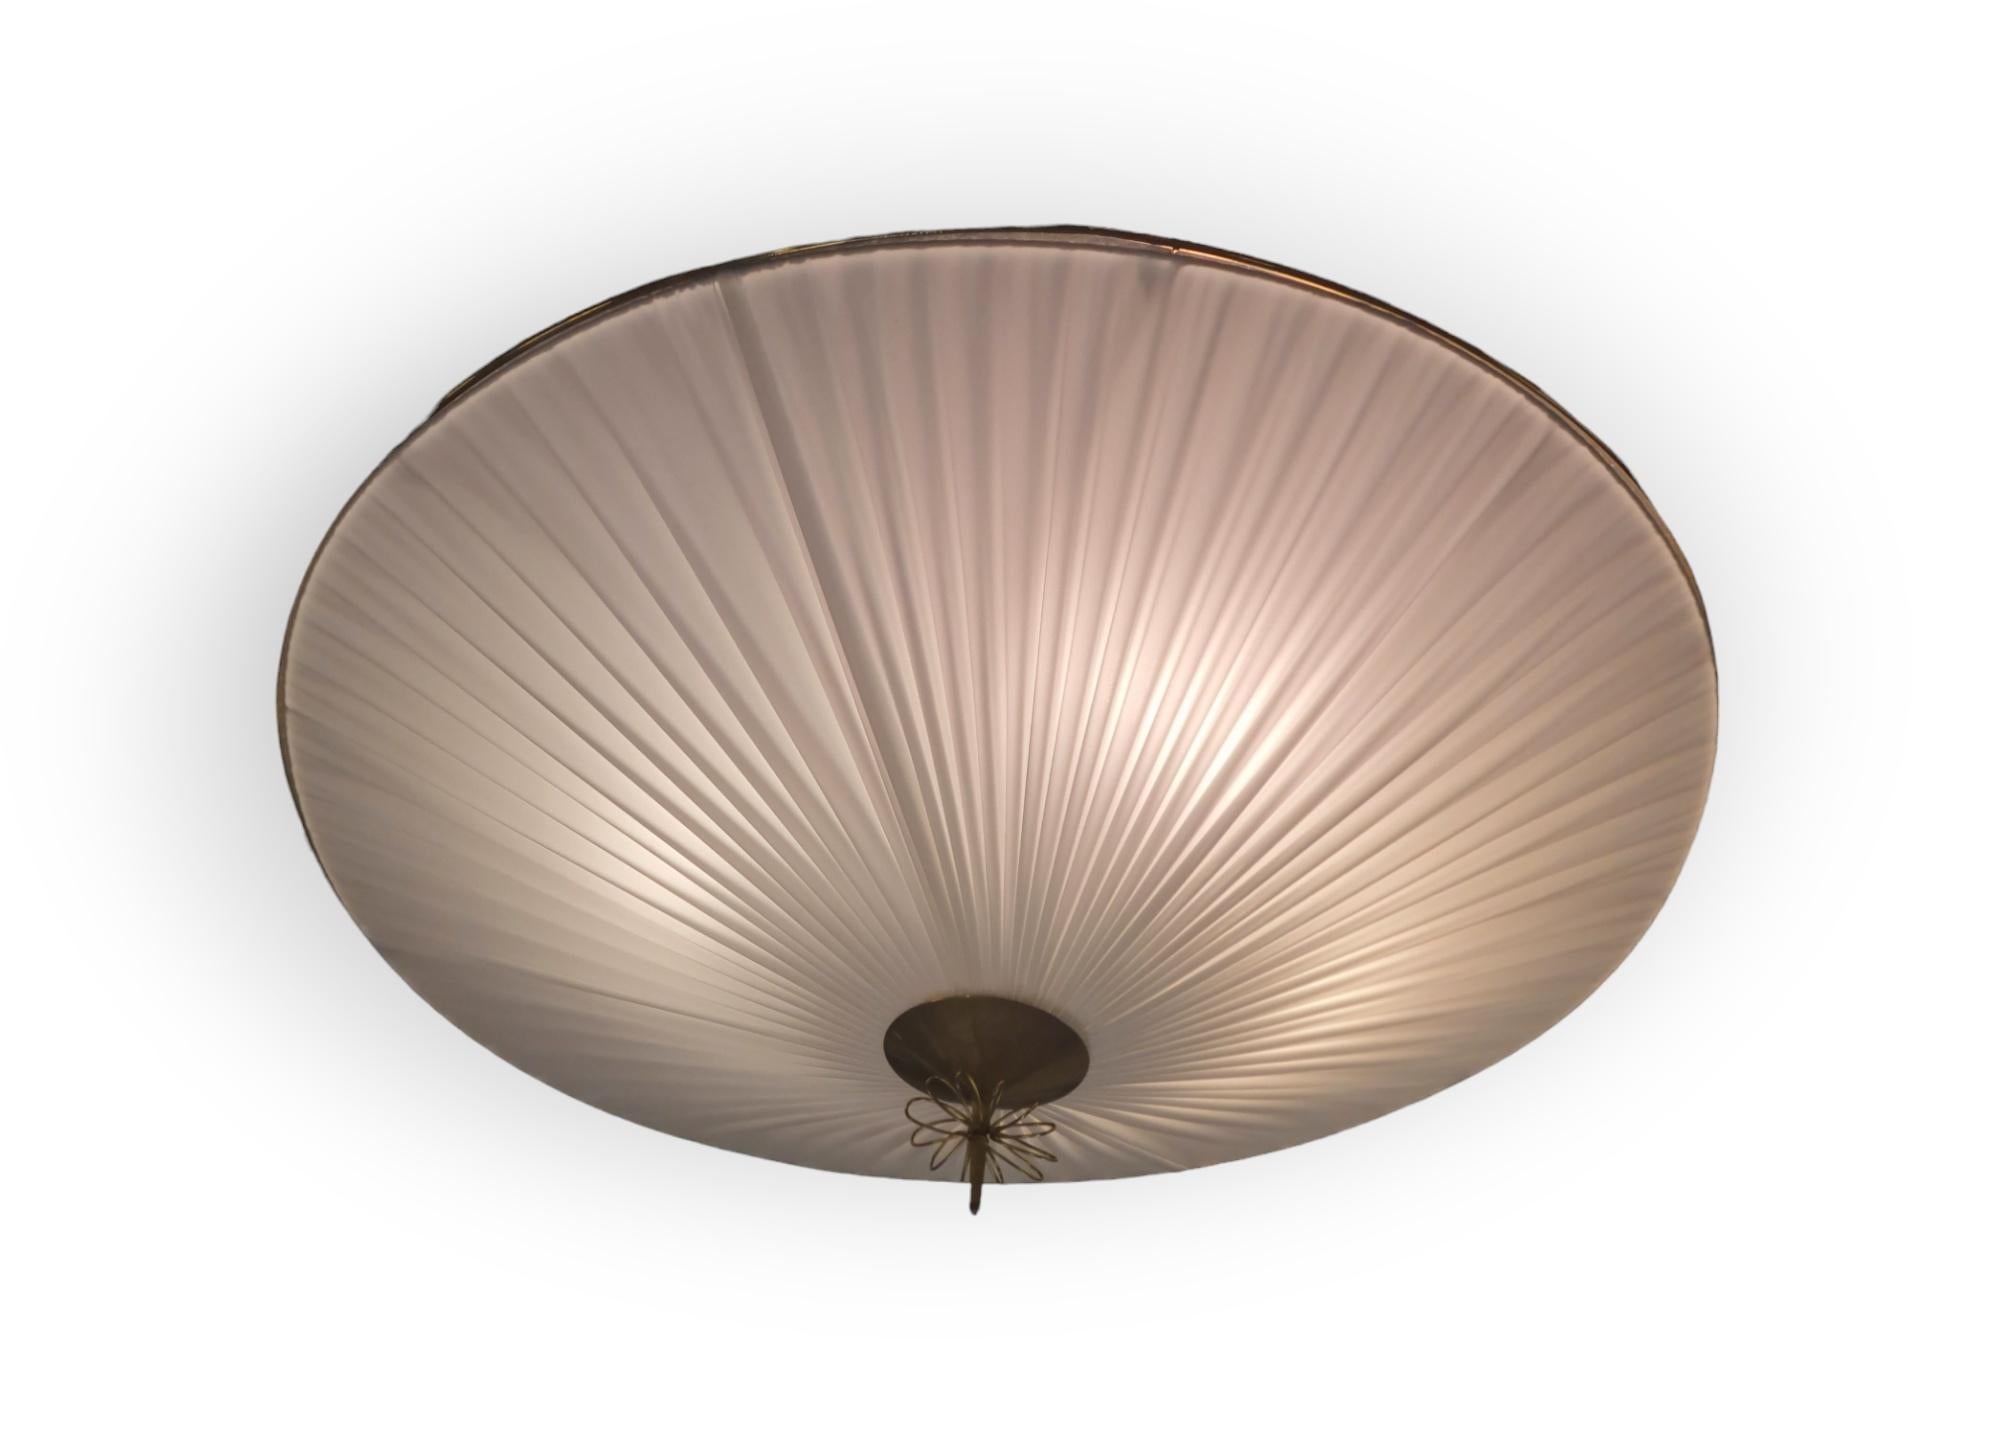 Mid-20th Century Monumental Paavo Tynell Commissioned Ceiling Lamp, In Brass and Fabric, Taito Oy For Sale